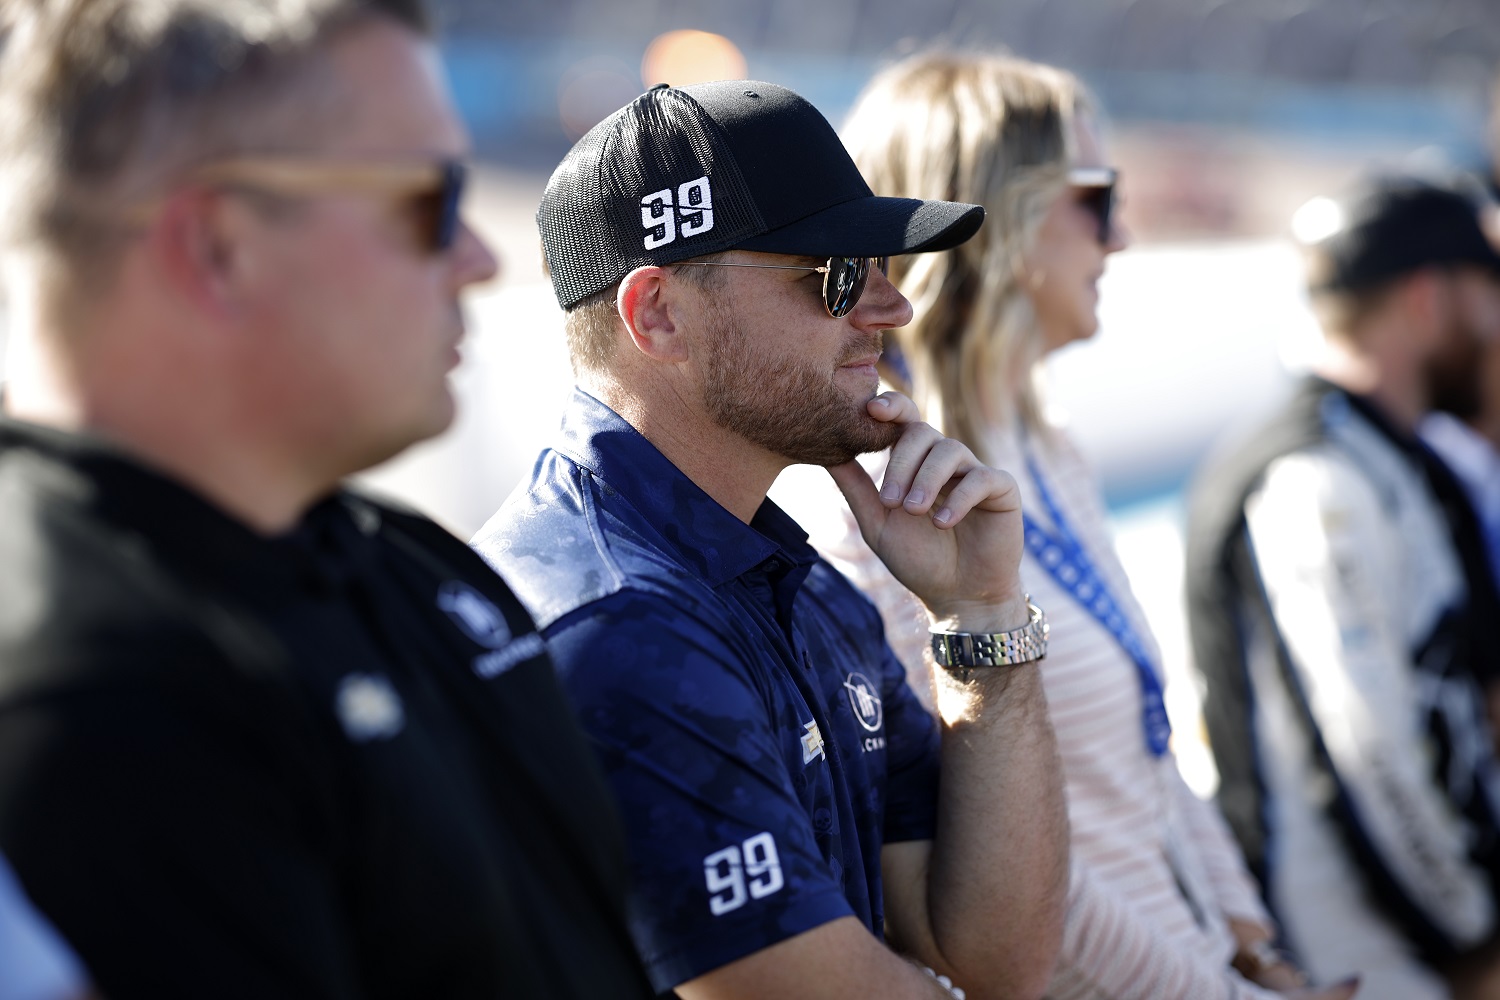 Trackhouse Racing team co-owner Justin Marks waits on the grid prior to the NASCAR Cup Series Championship at Phoenix Raceway on Nov. 6, 2022. | Chris Graythen/Getty Images